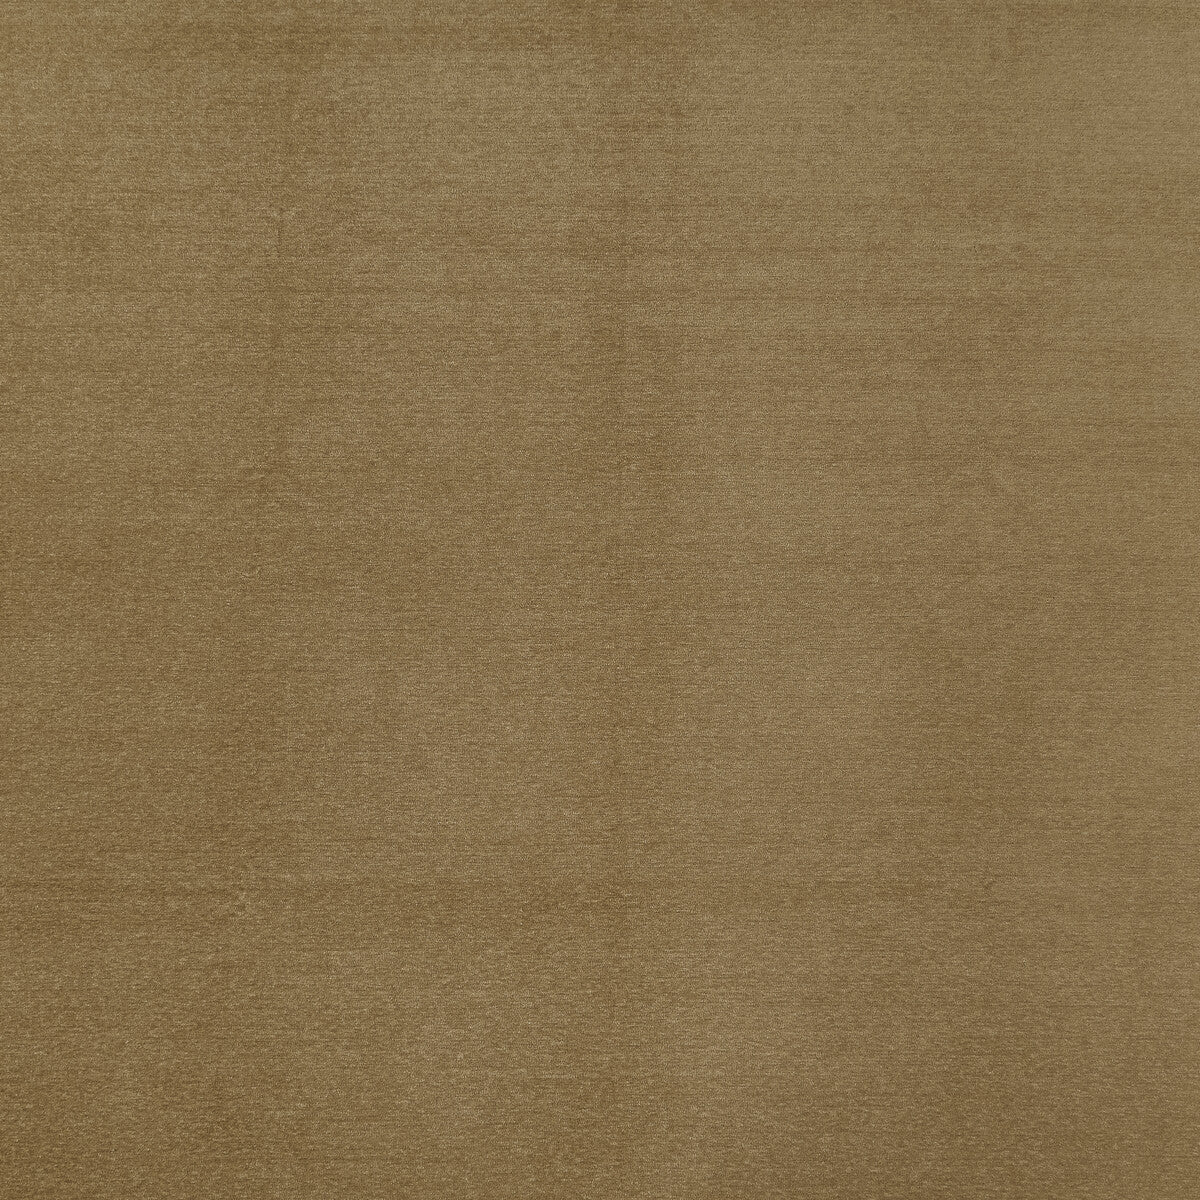 Maculo fabric in taupe color - pattern F1423/15.CAC.0 - by Clarke And Clarke in the Clarke &amp; Clarke Purus collection